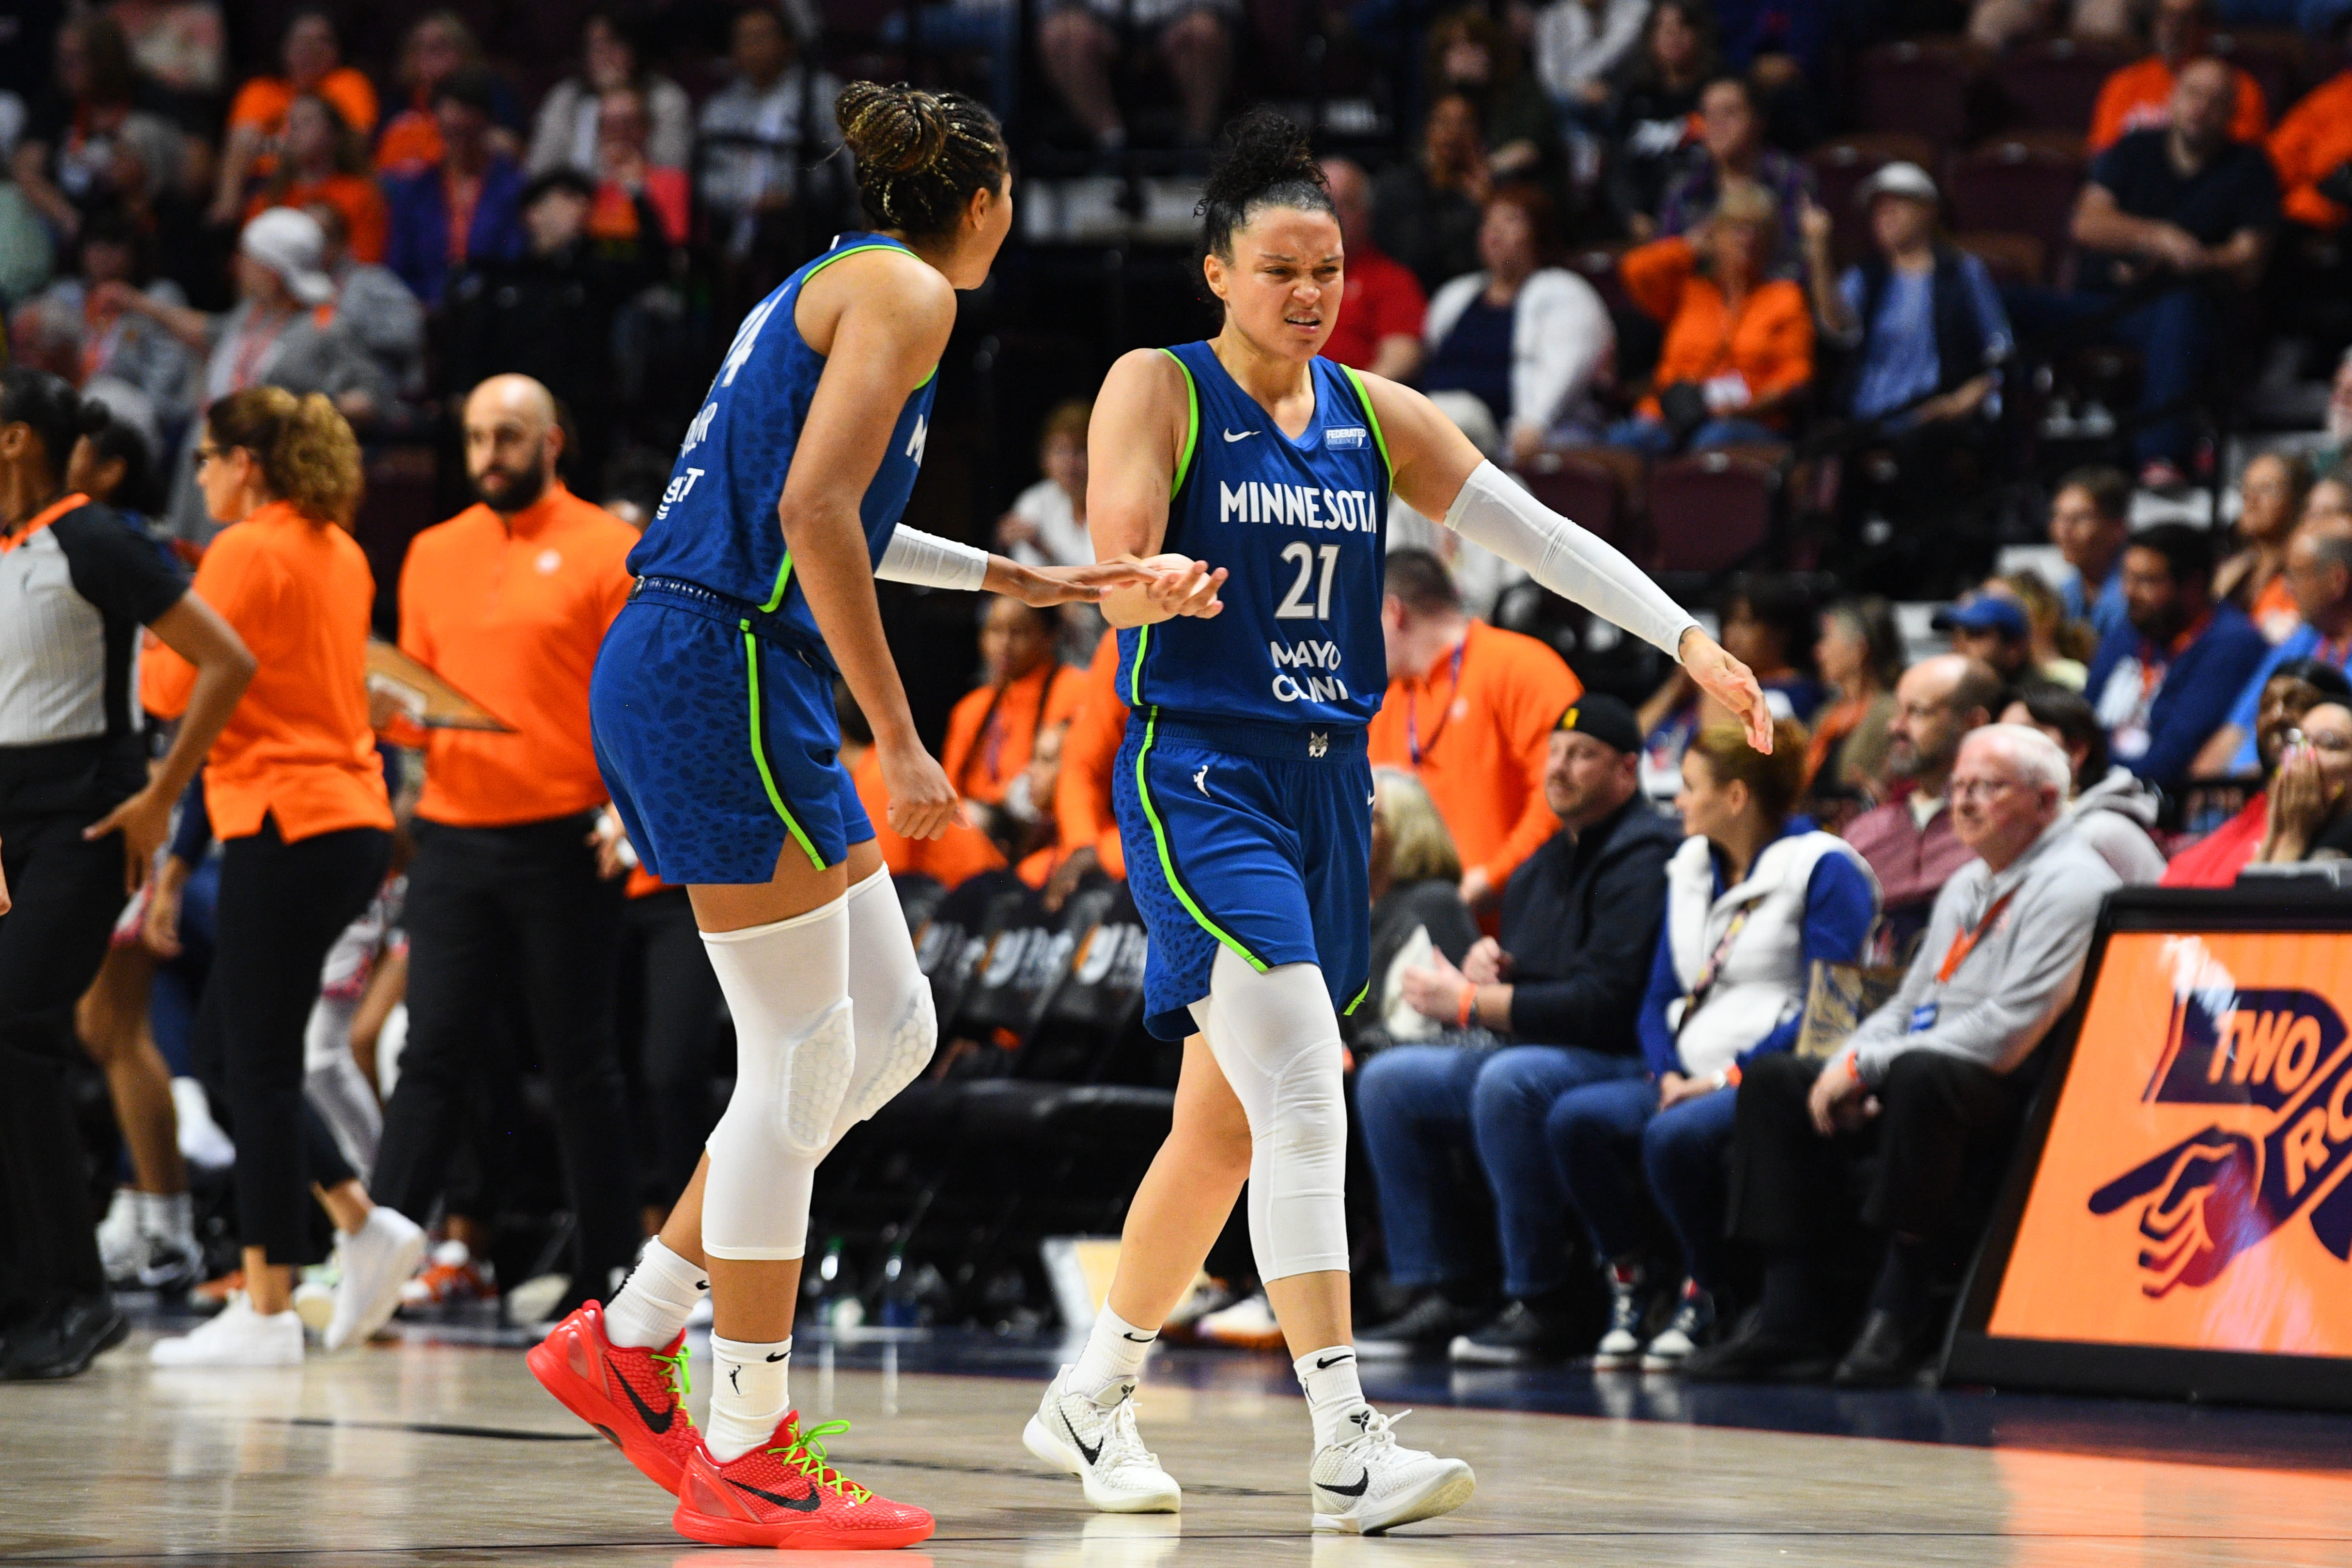 Minnesota Lynx resembling championship teams of the past in more ways than one